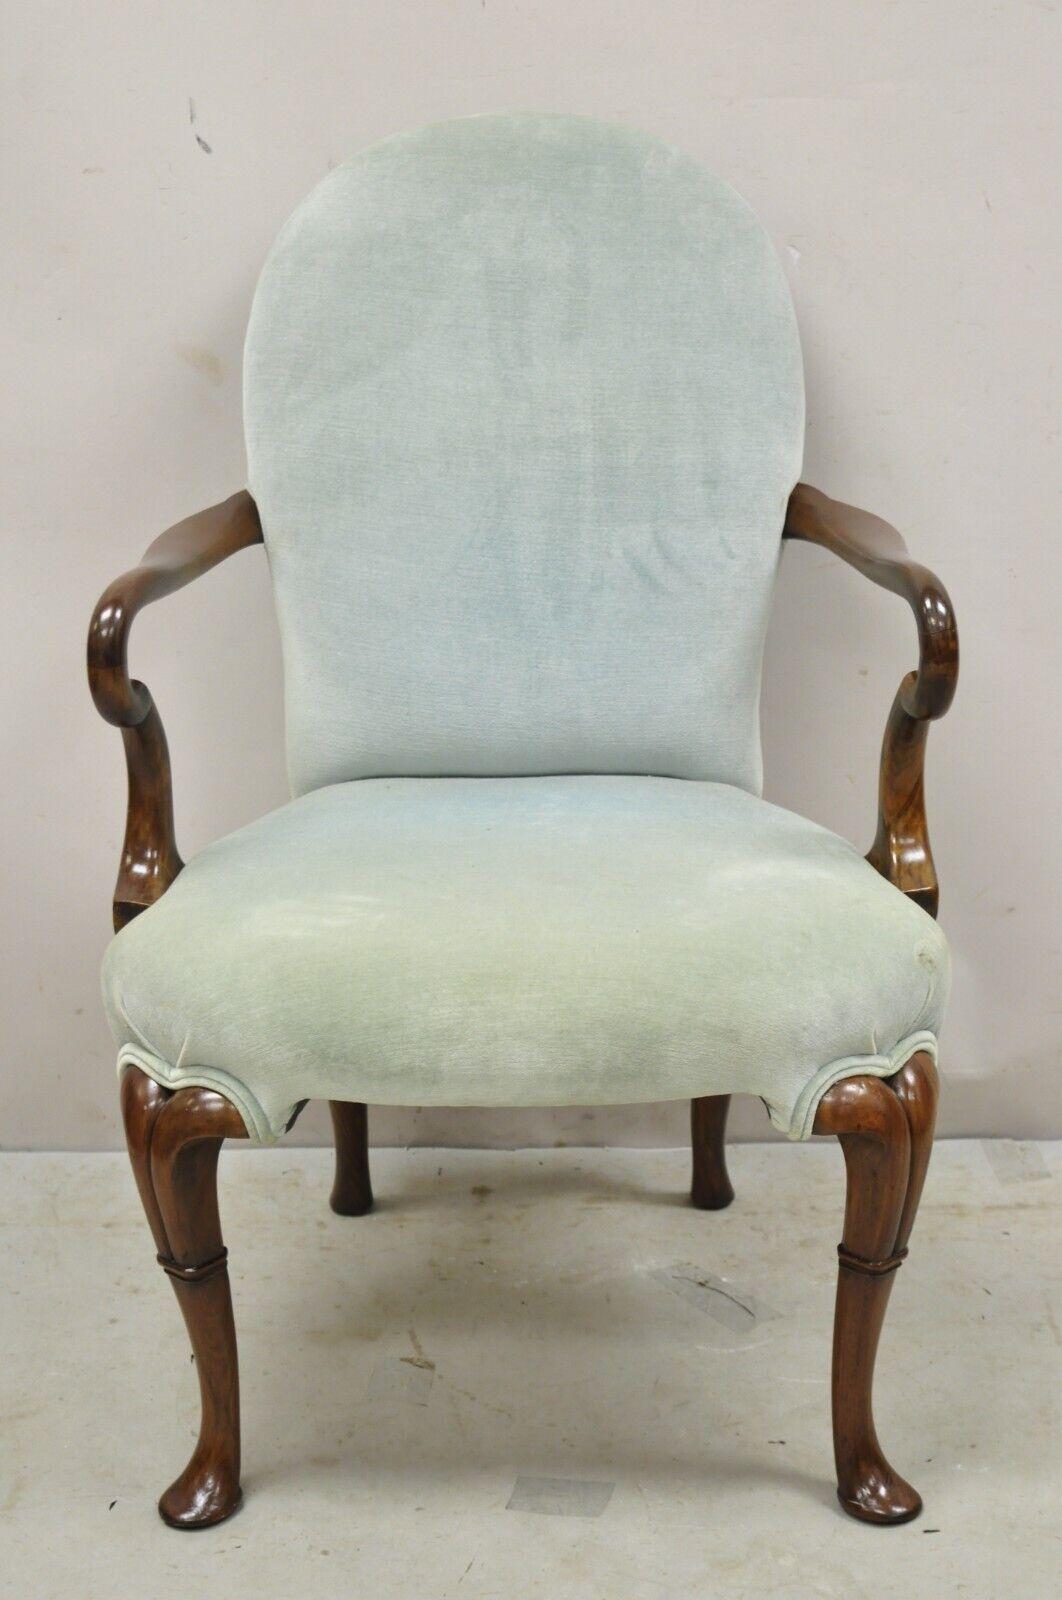 Vintage English Queen Anne Style Walnut Gooseneck Blue Arm Chair. Item features a solid mahogany and walnut wood frame, shapely Queen Anne legs, blue upholstery, beautiful wood grain. Circa Mid 20th Century. Measurements: 37